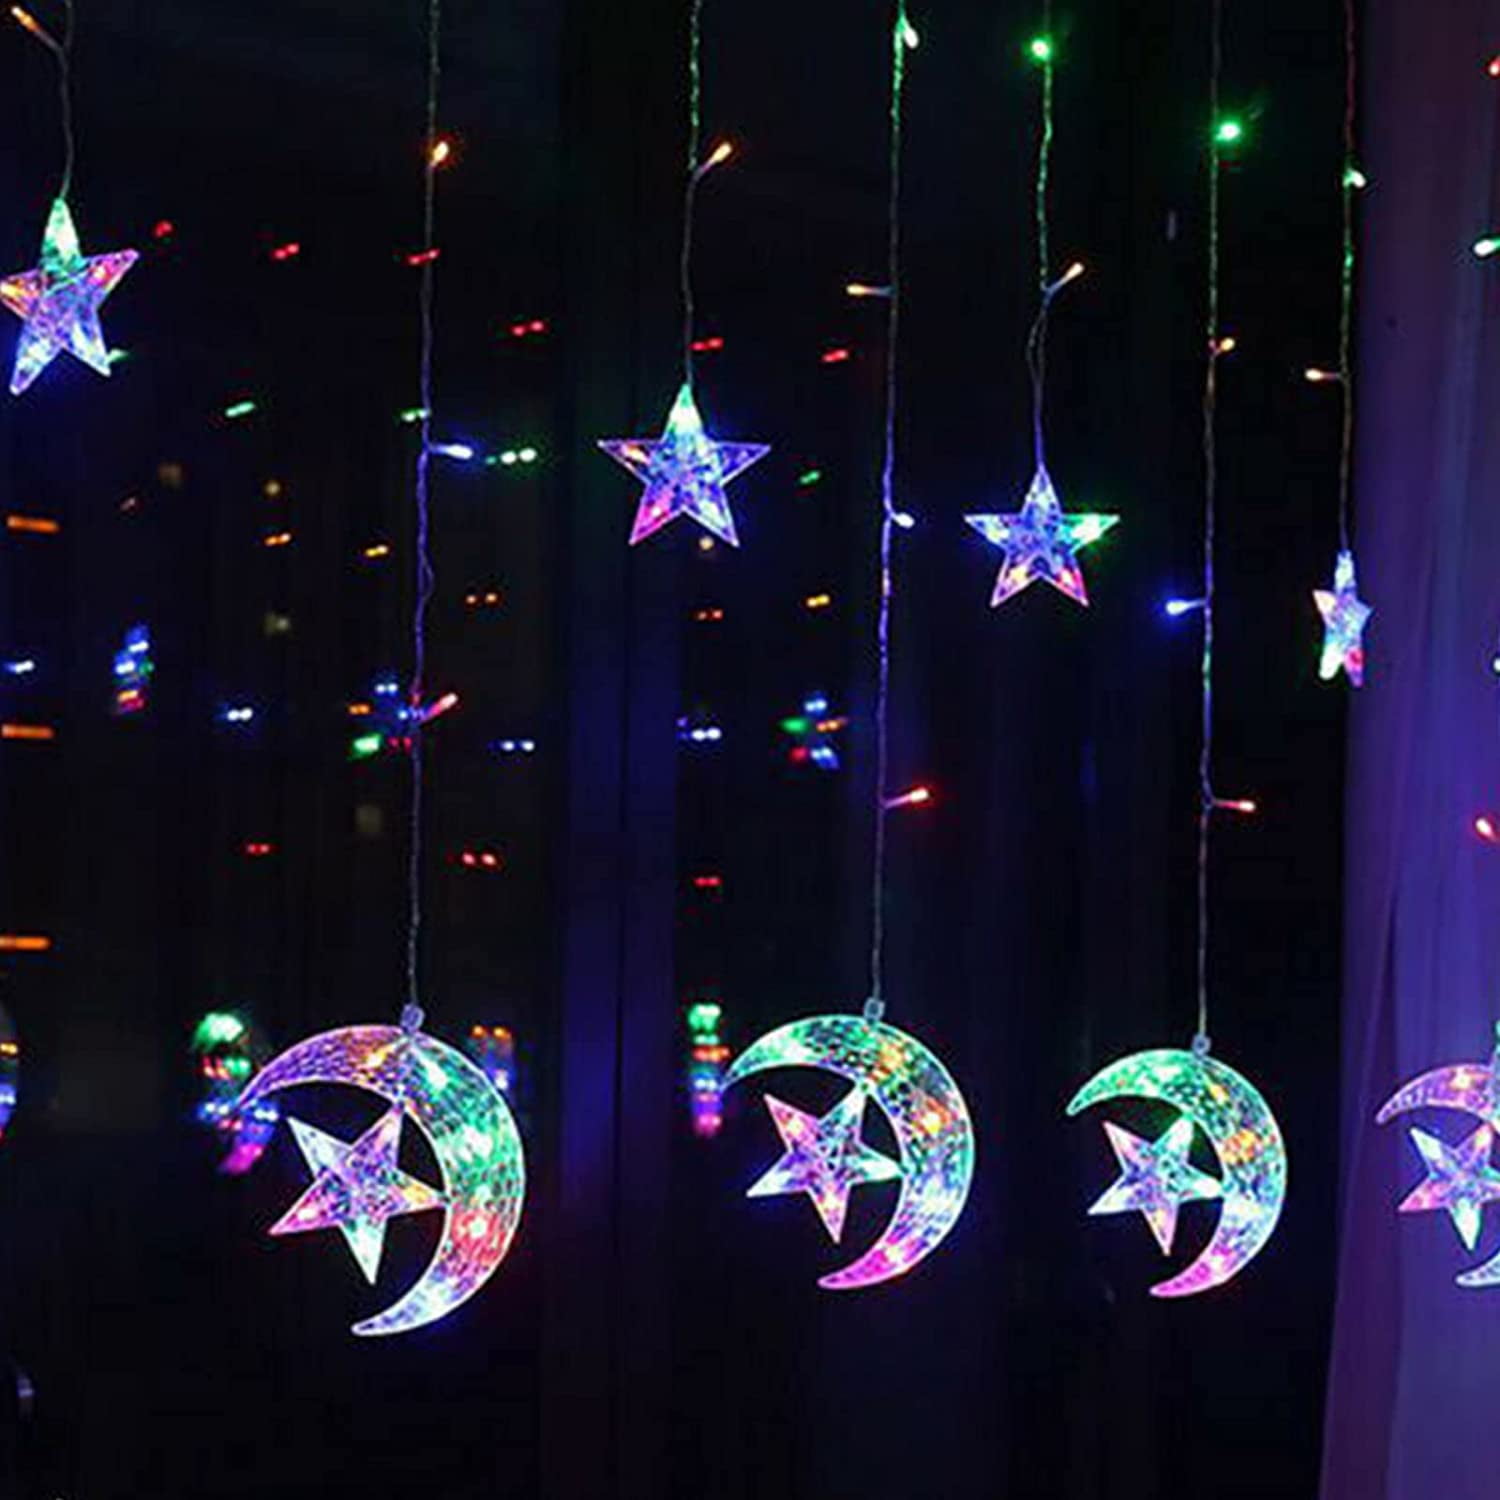 Details about   Moon Star 138 Led String Lights Xmas Window Curtain Fairy light Lamp Home Decor 